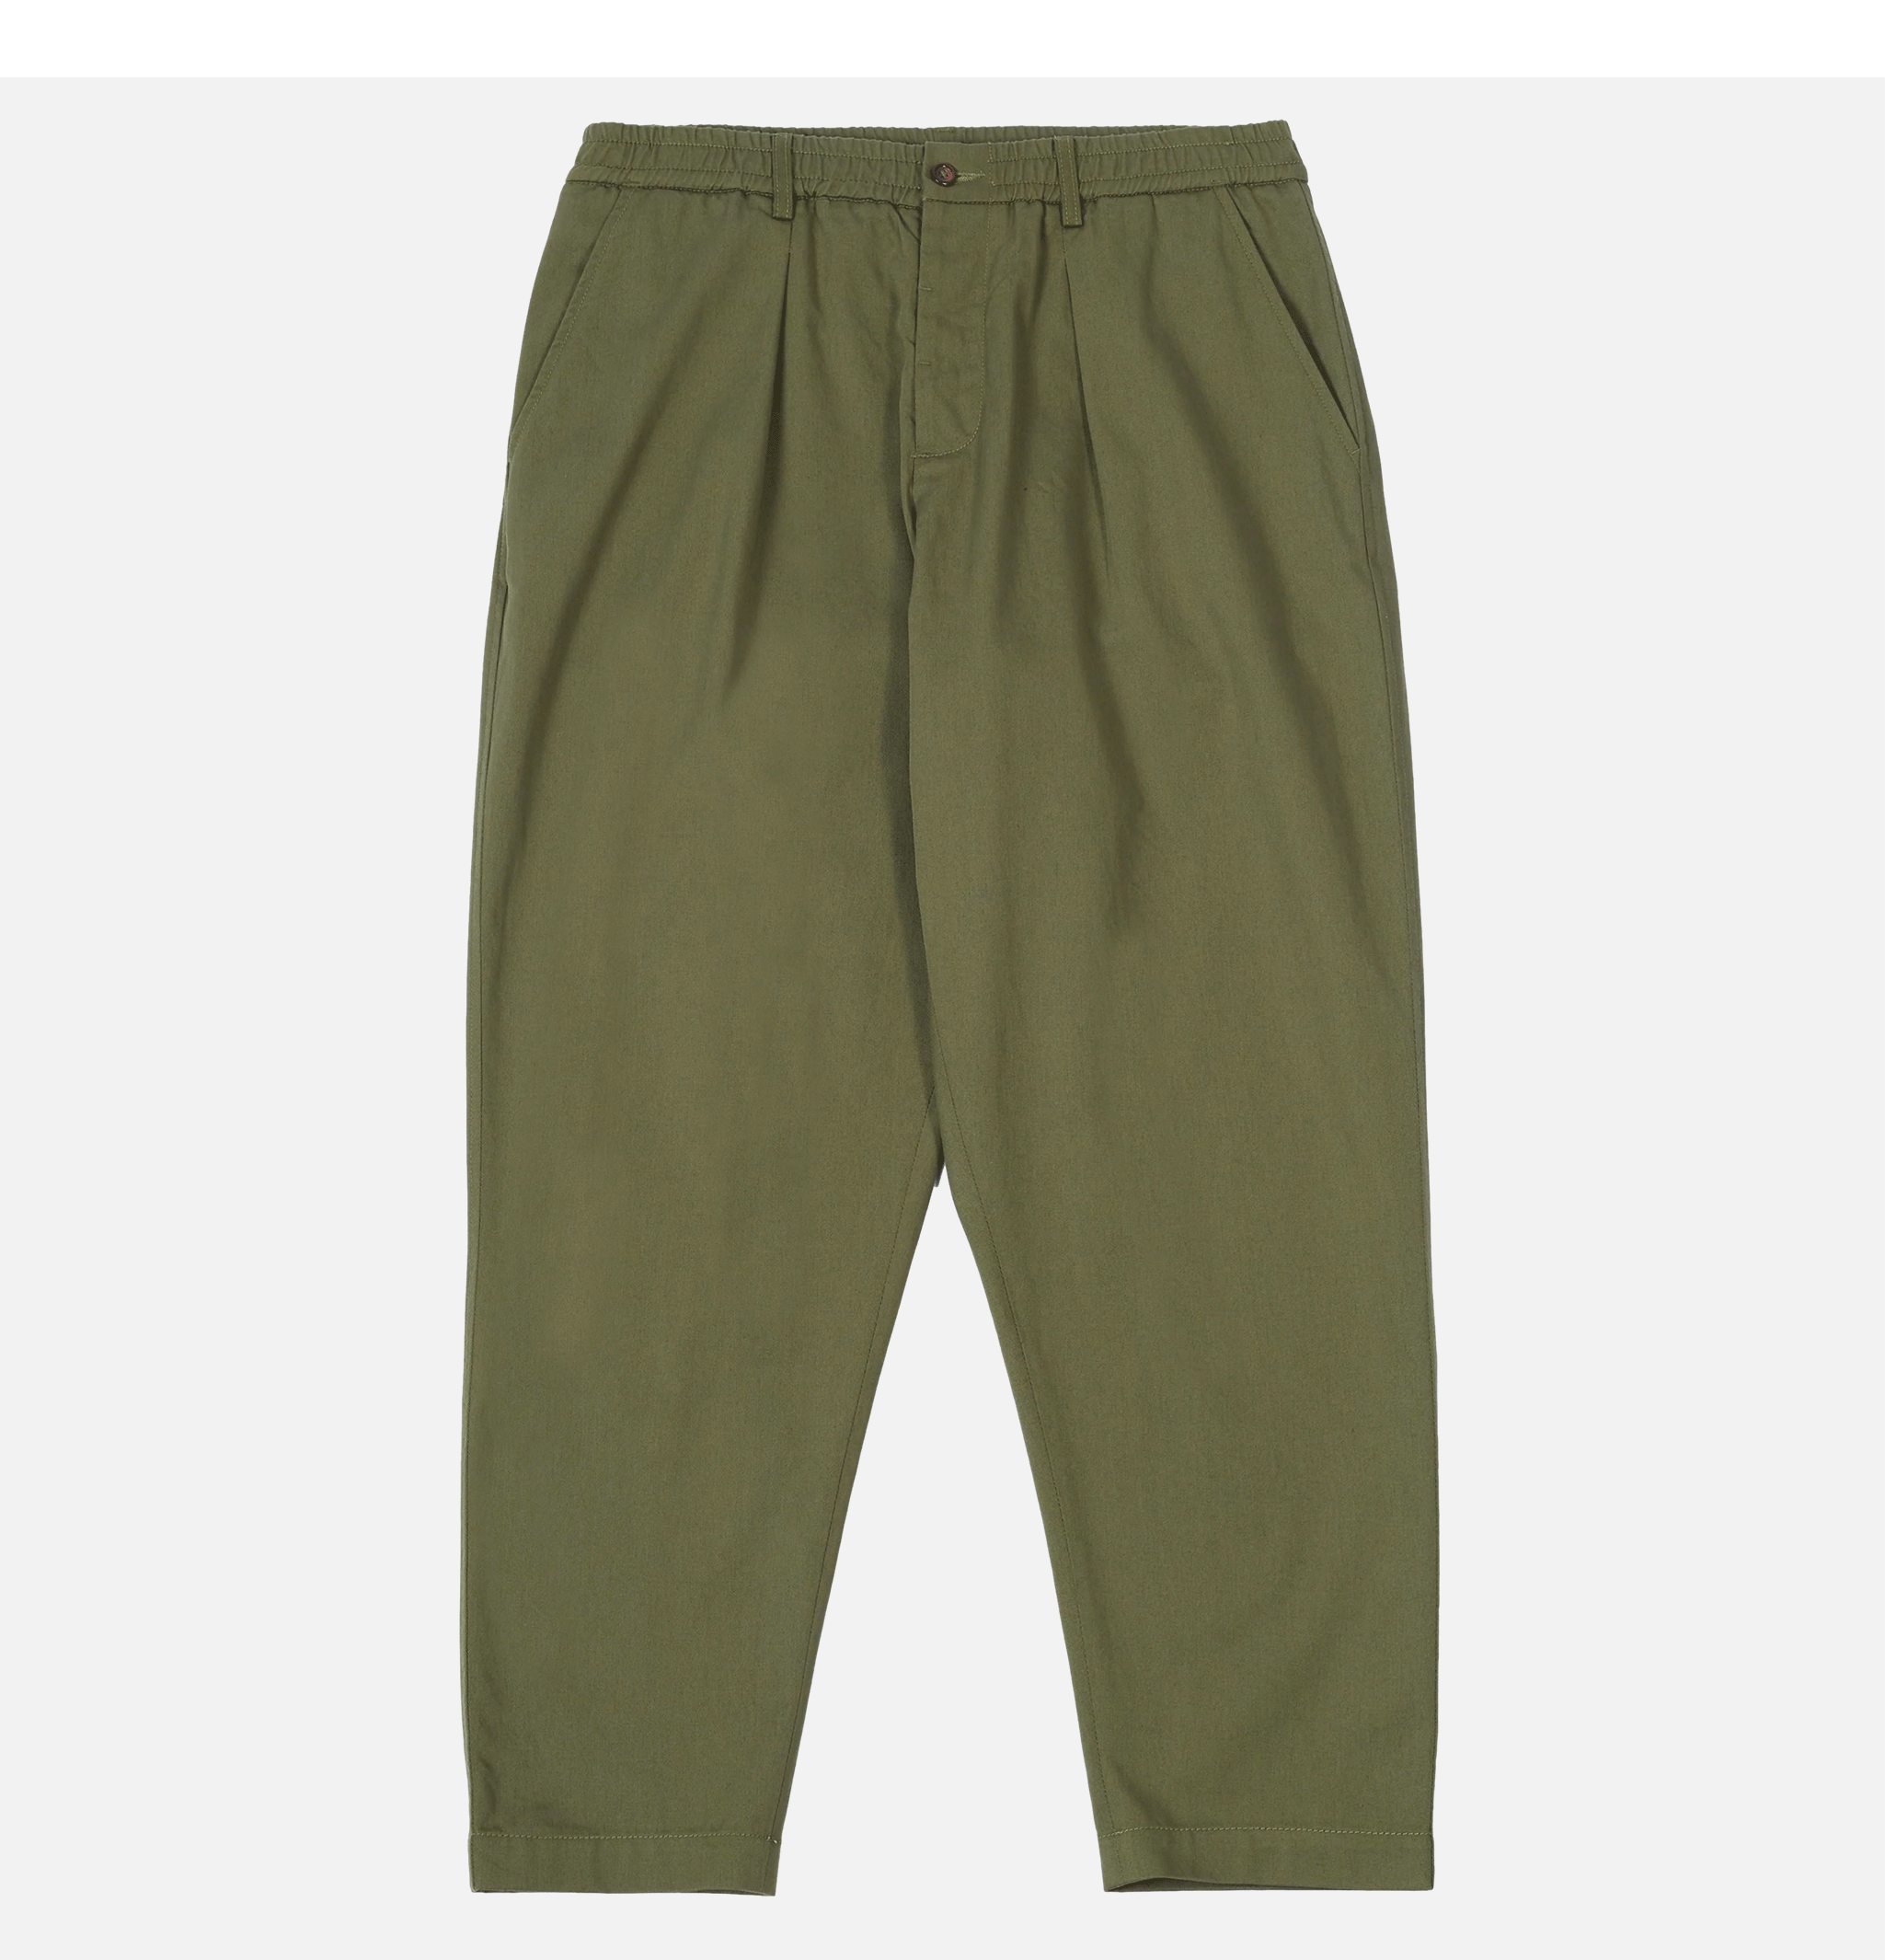 Universal Works Double Pleat Pant Olive Twill.